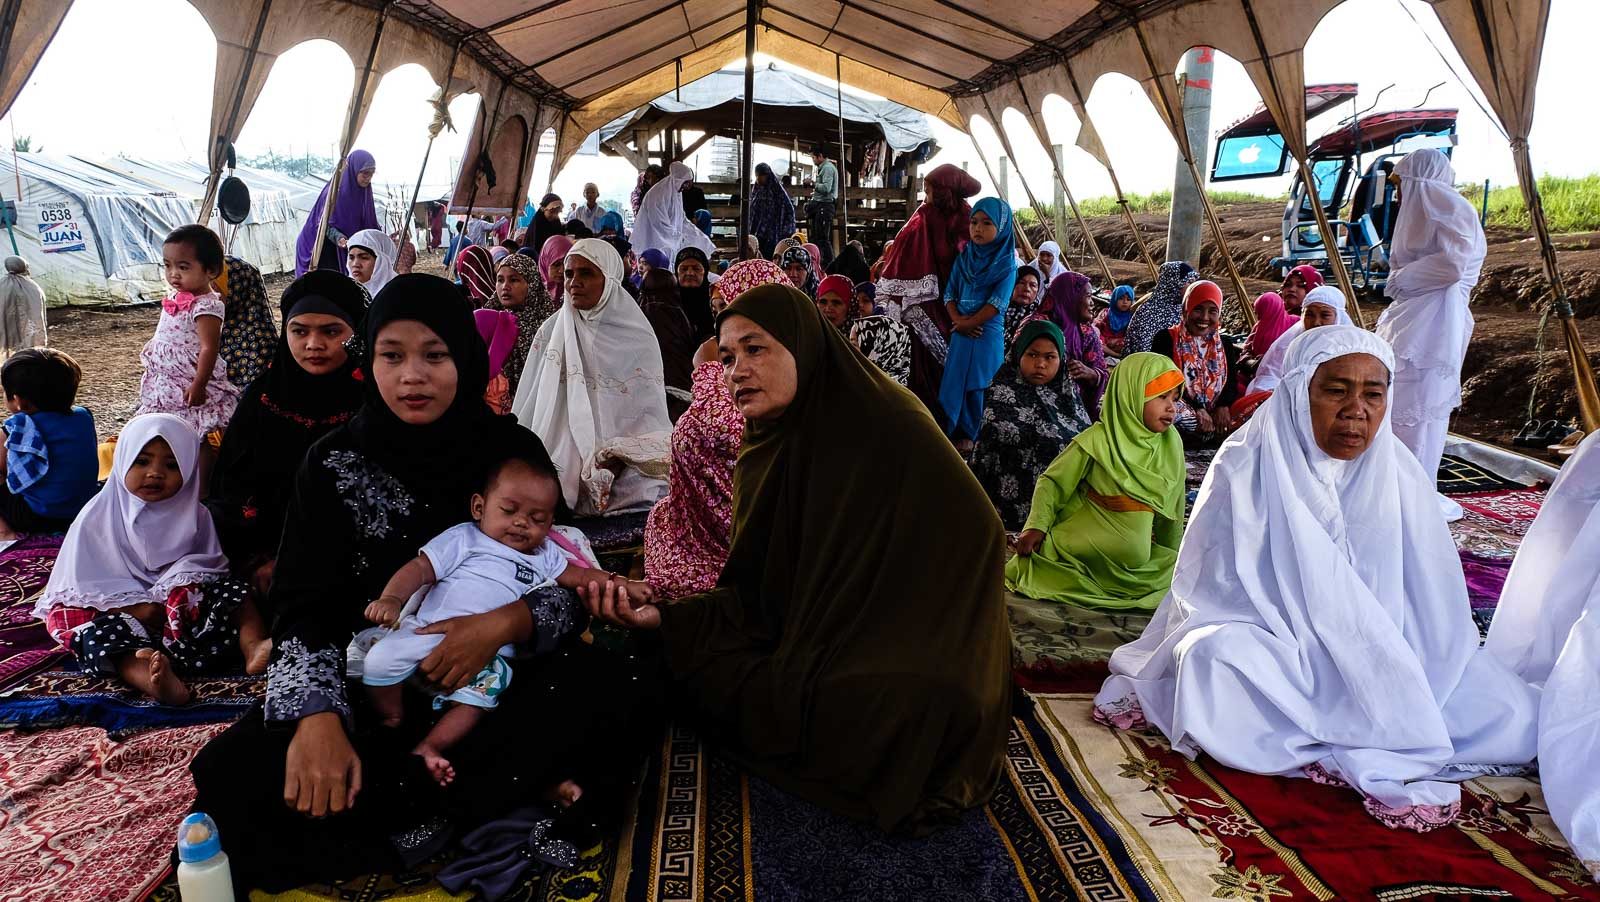 On Eid’l Fitr, Marawi IDPs pray for fortitude and a home to go back to